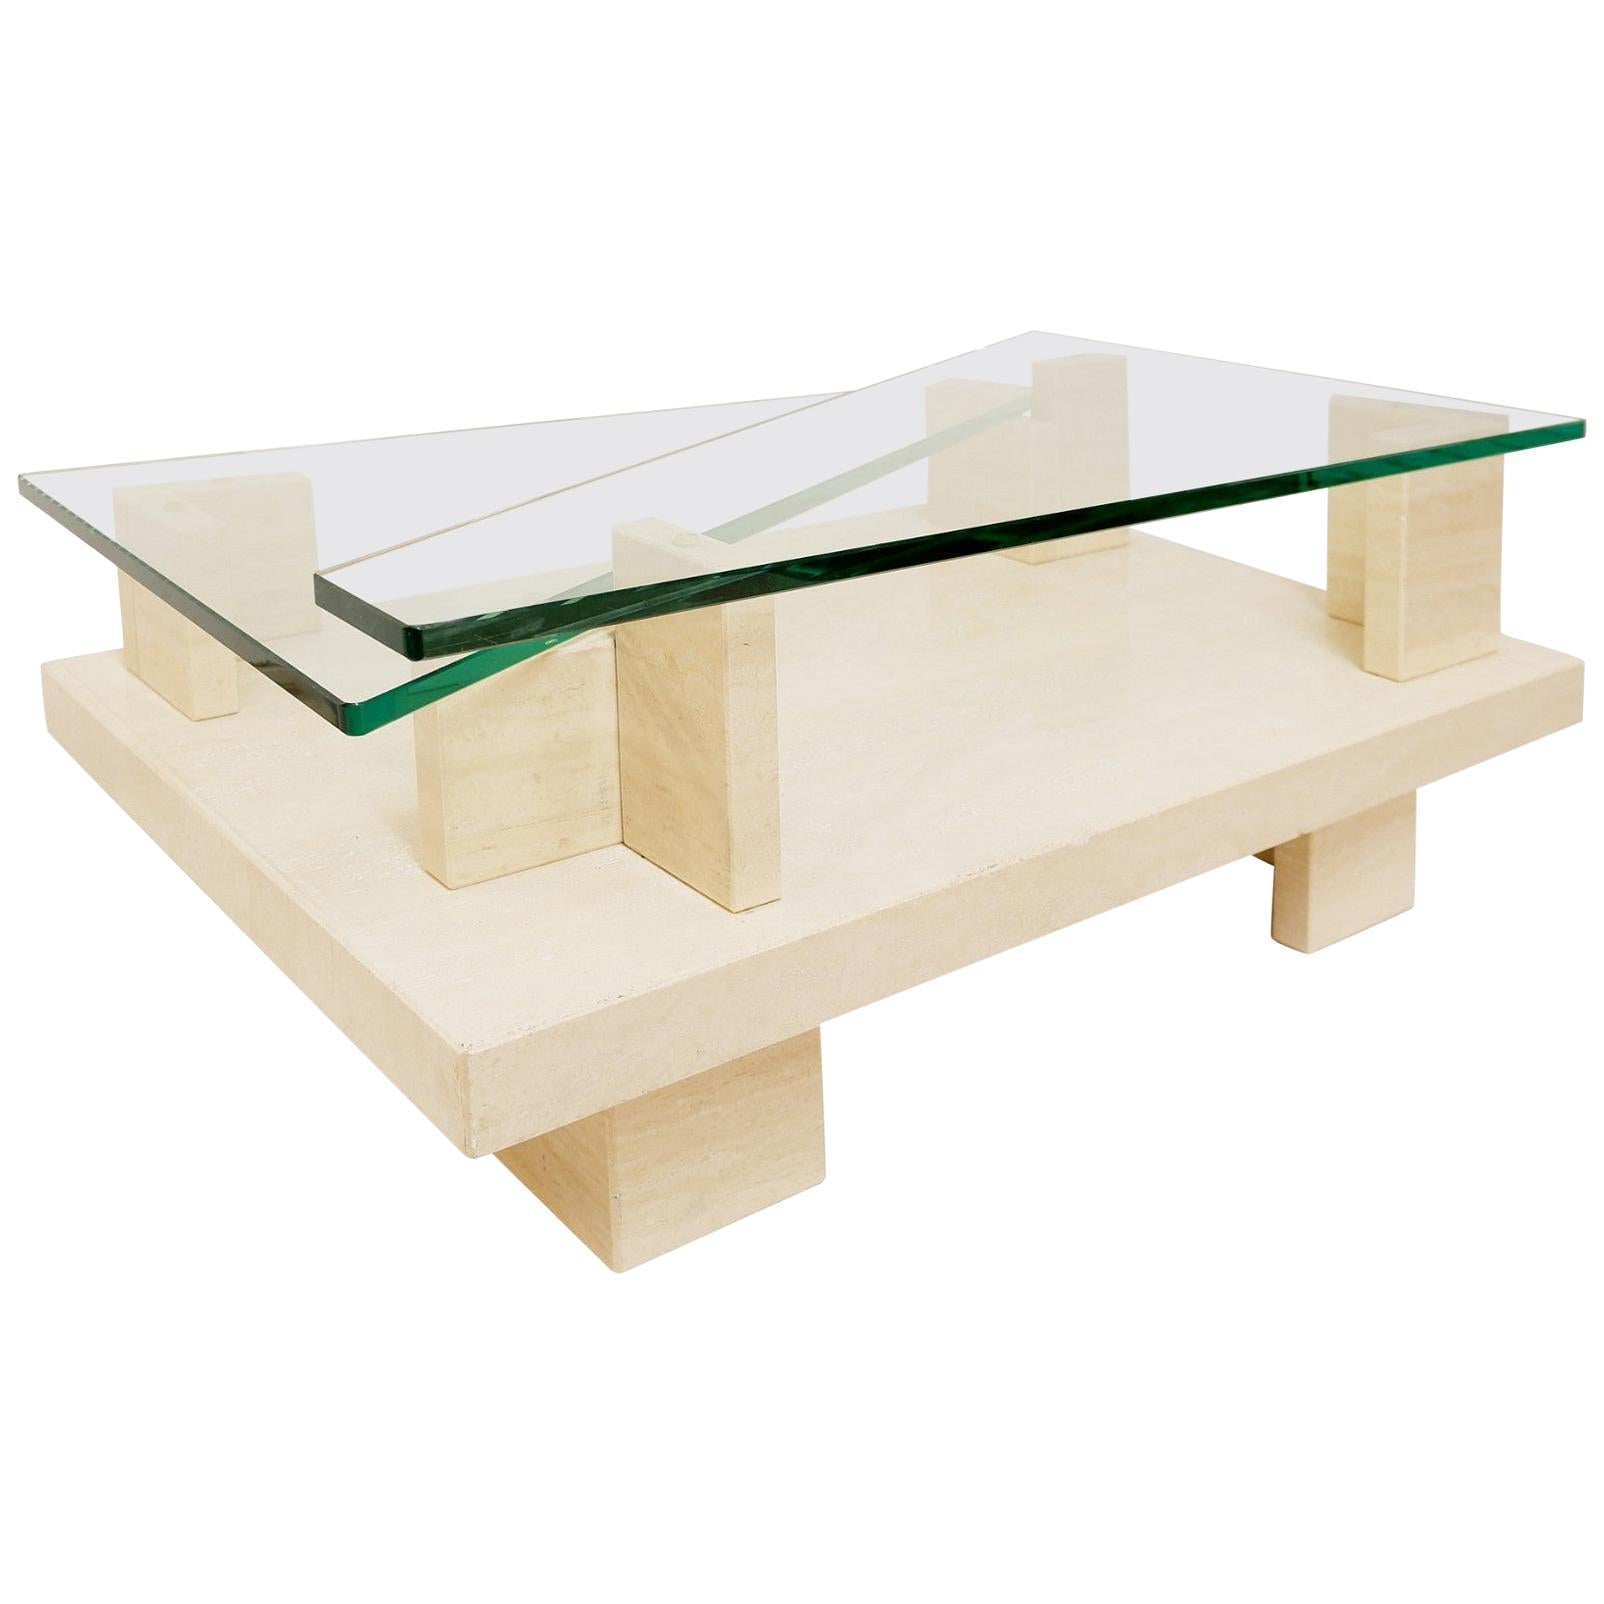 Glass Top and Travertine Graphic Coffee Table